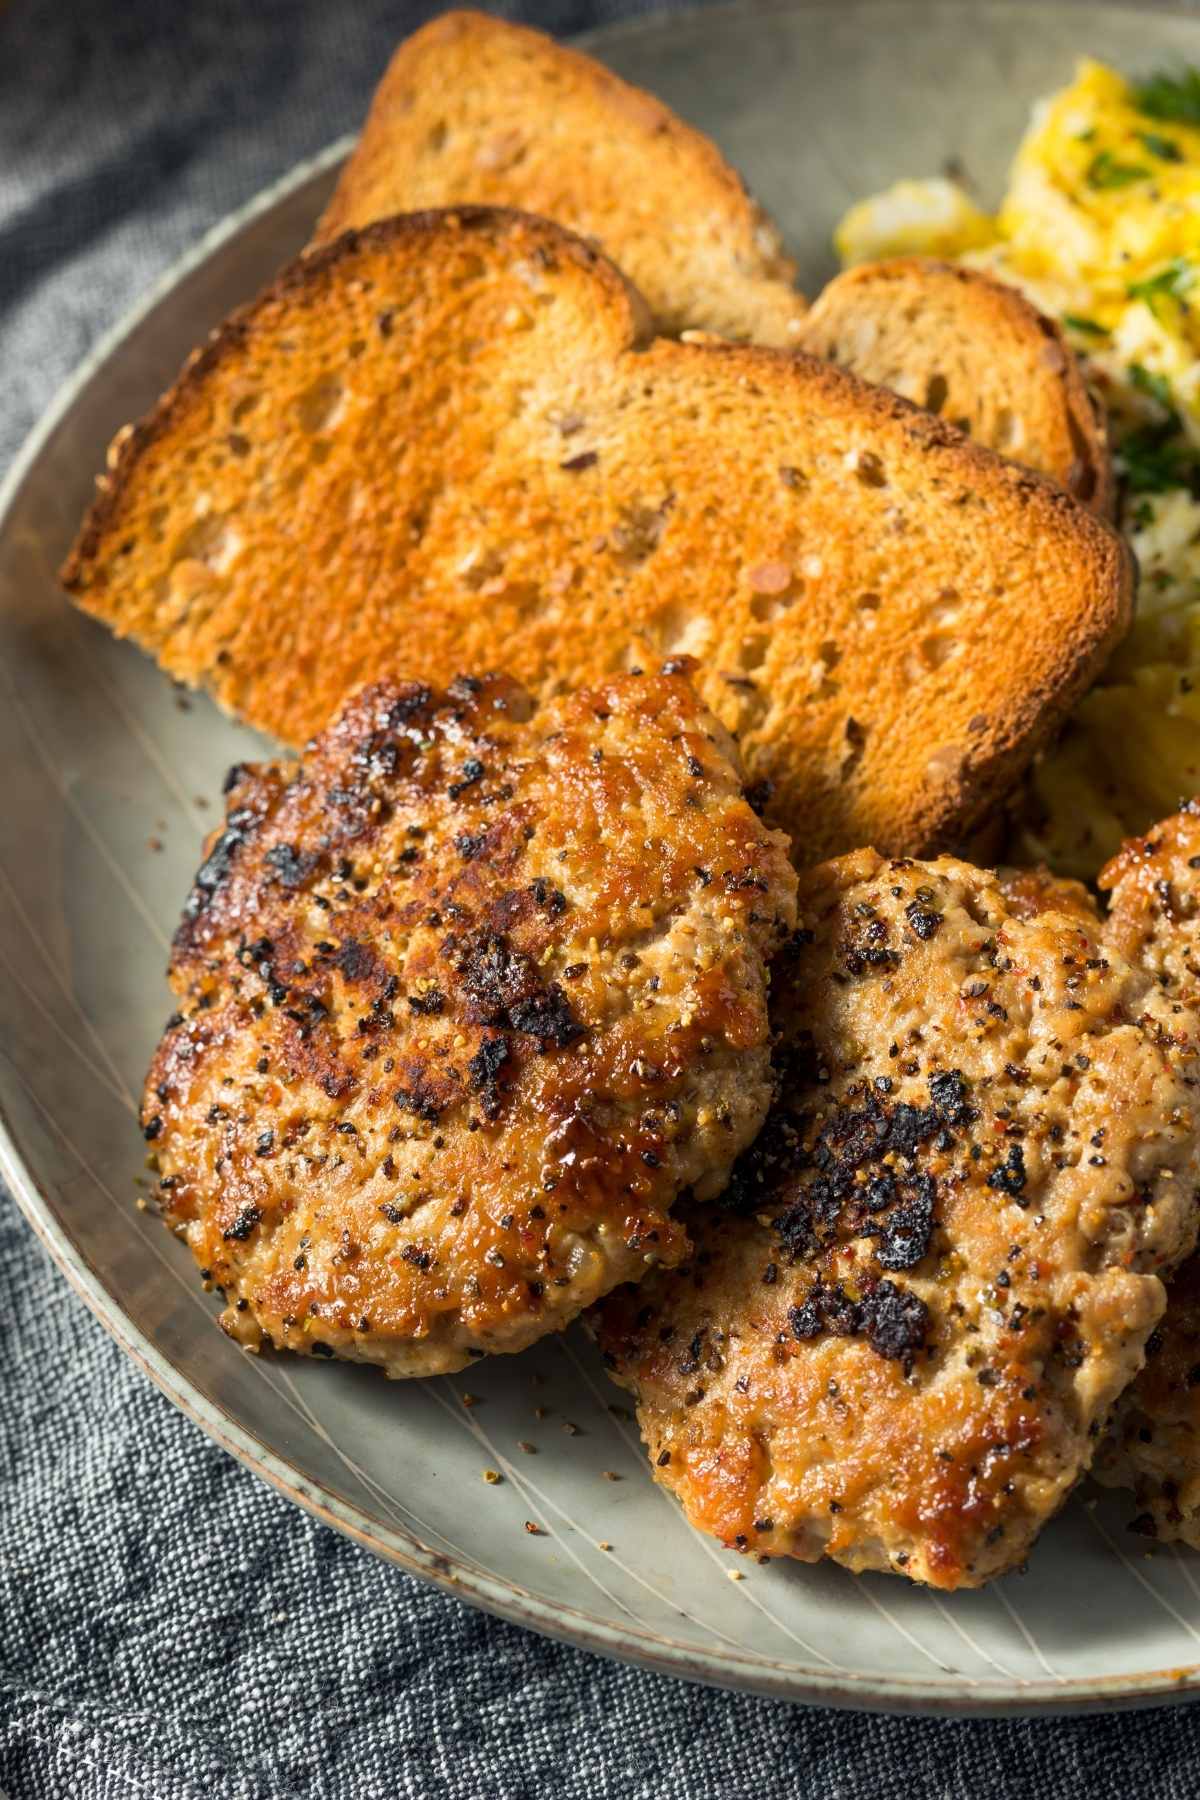 Combine ground pork with plenty of seasoning to create this simple and easy Breakfast Sausage recipe in the comfort of your home!